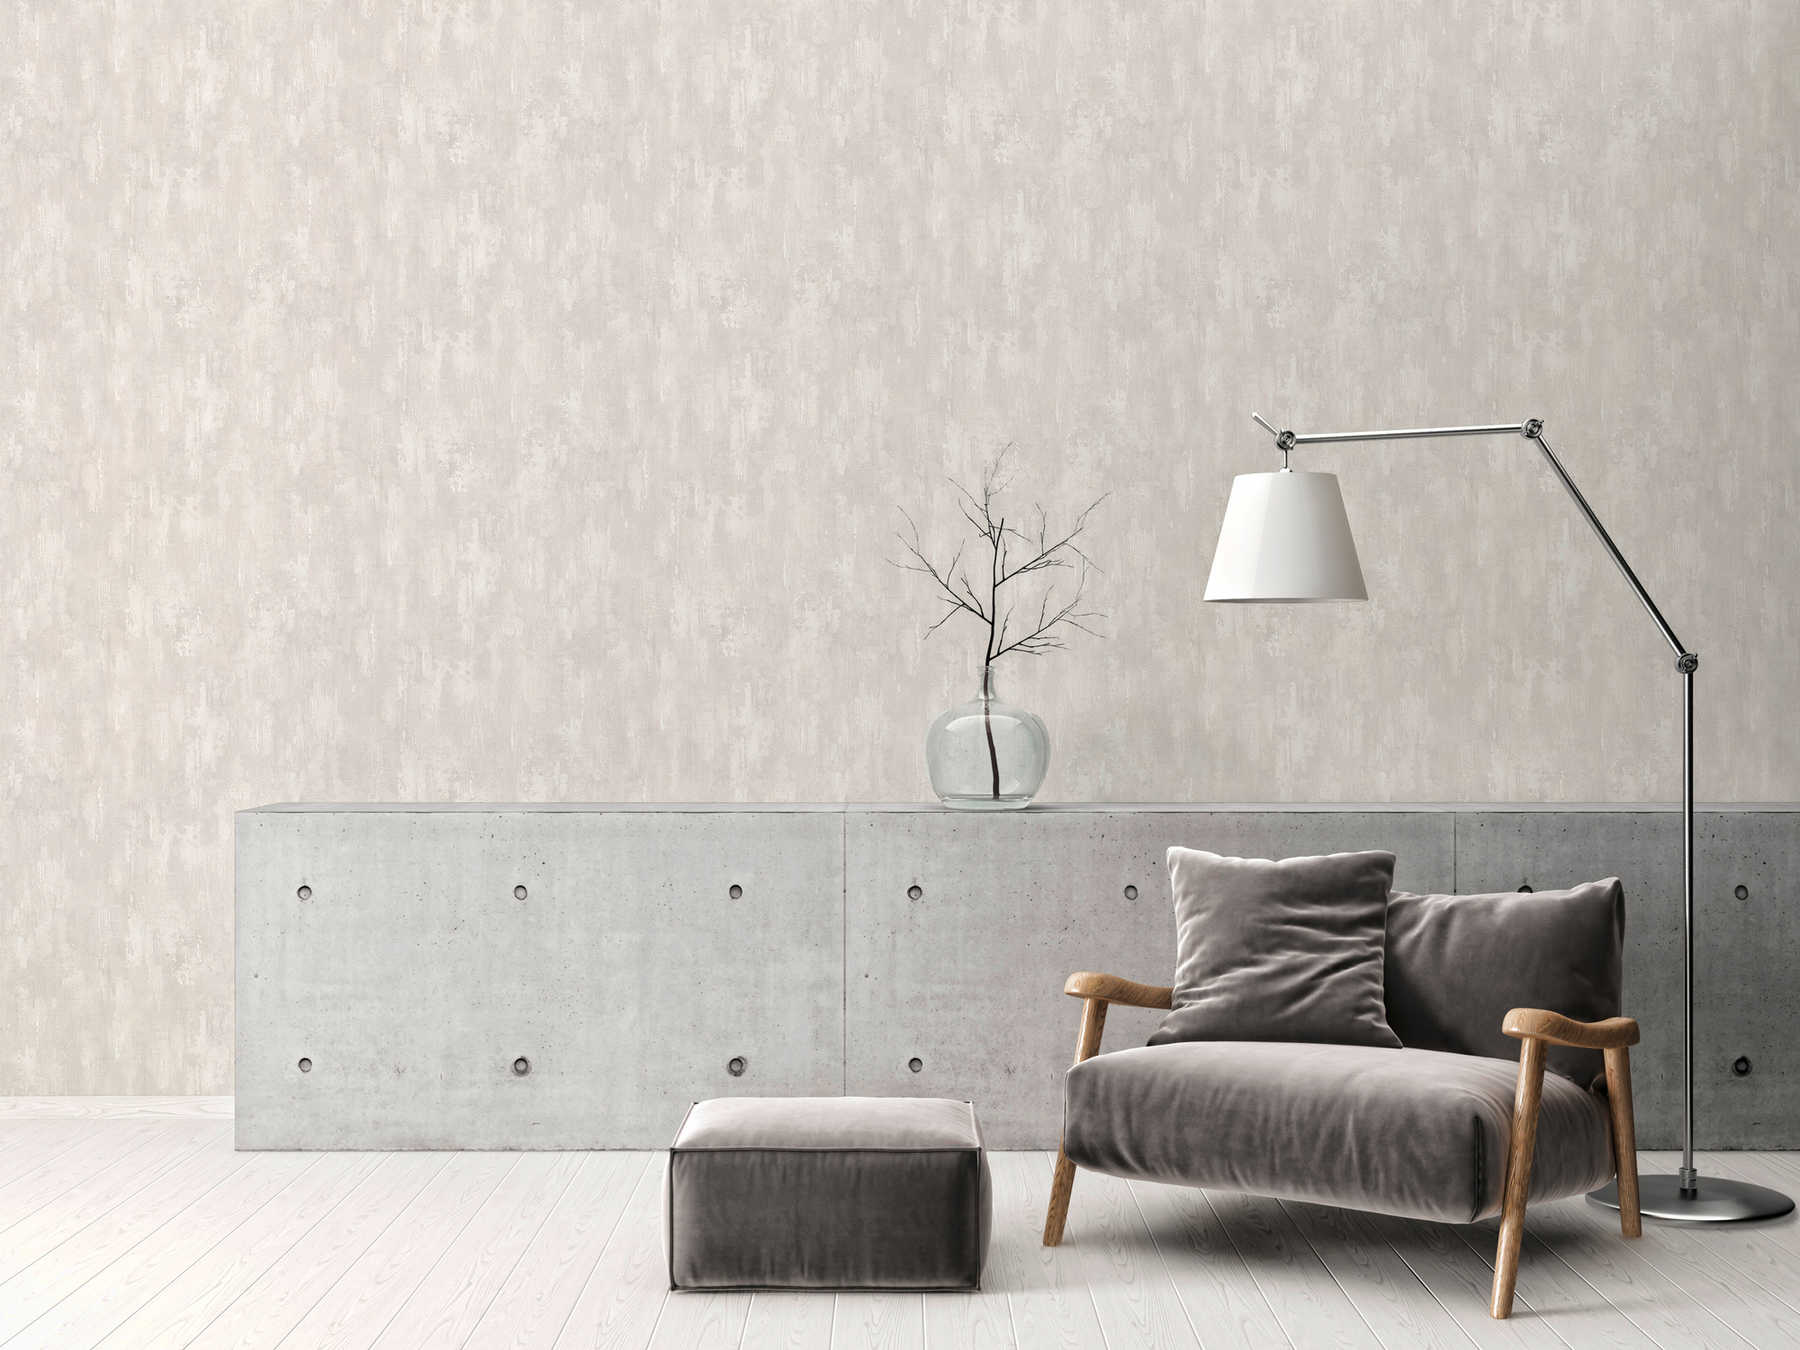             Wallpaper with plaster texture, concrete look and gradient - grey, white
        